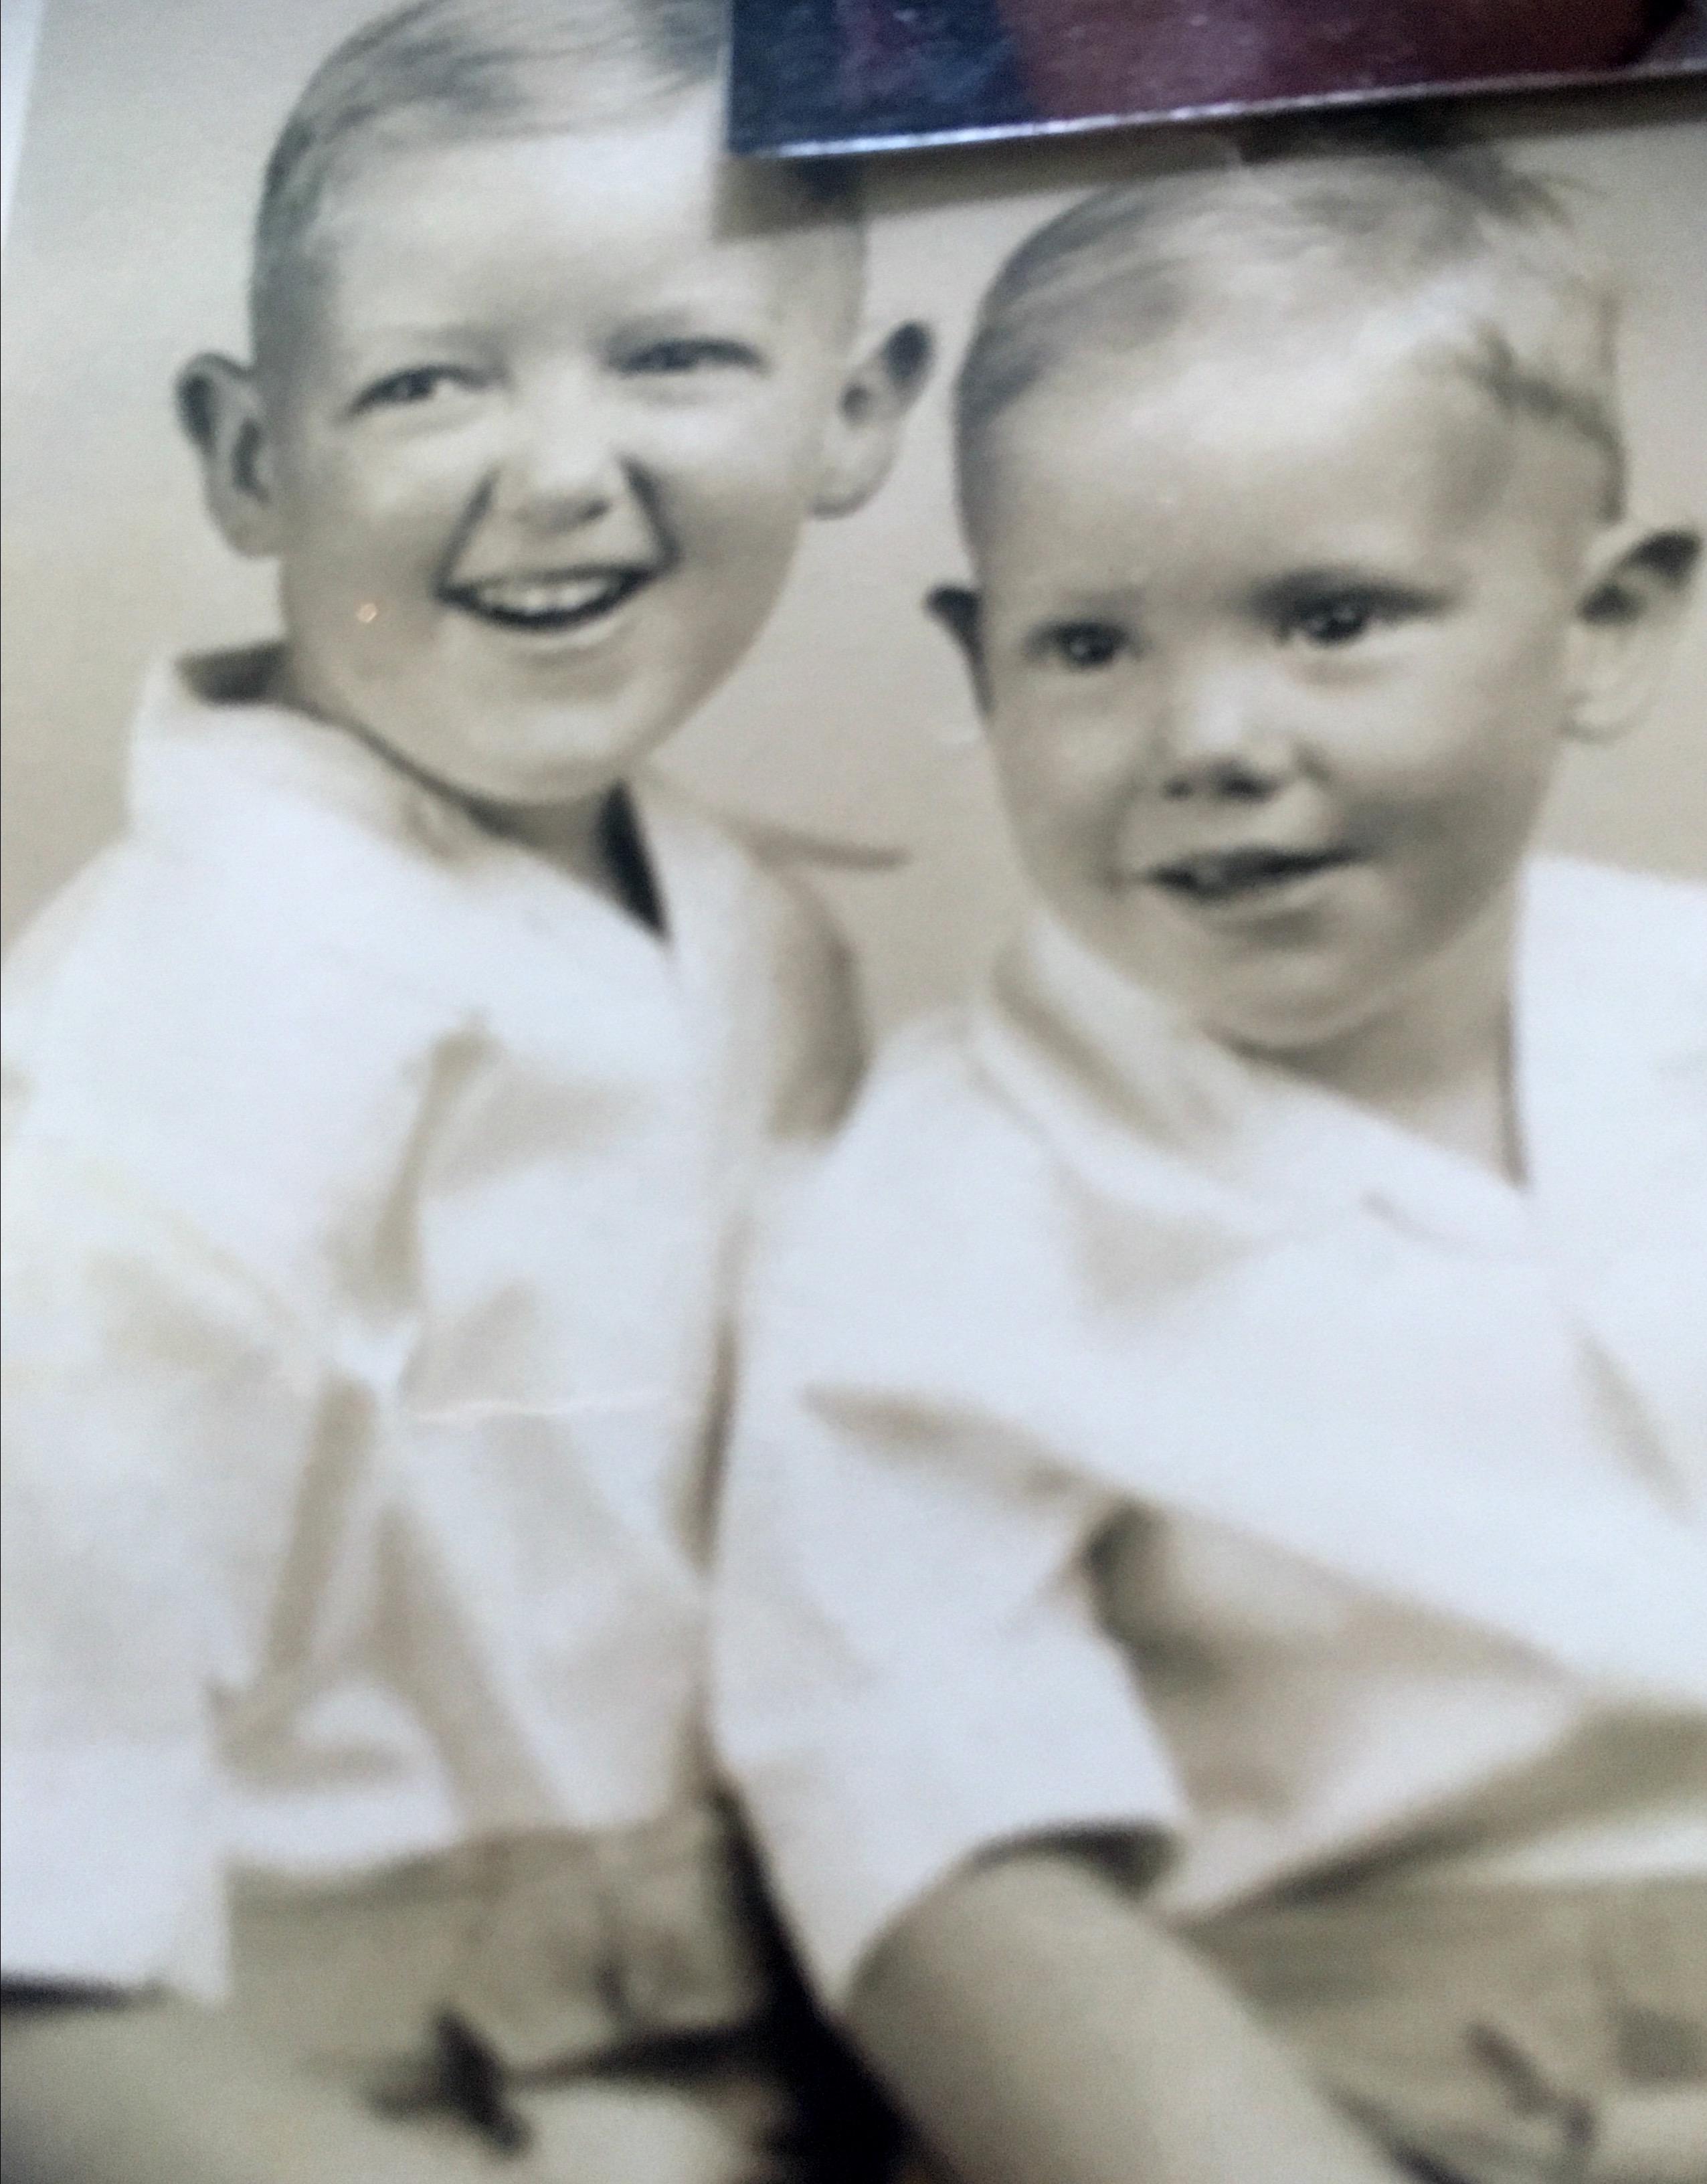 Bill and Howie, ages 6 and 3 in Utica, NY @ 1950?